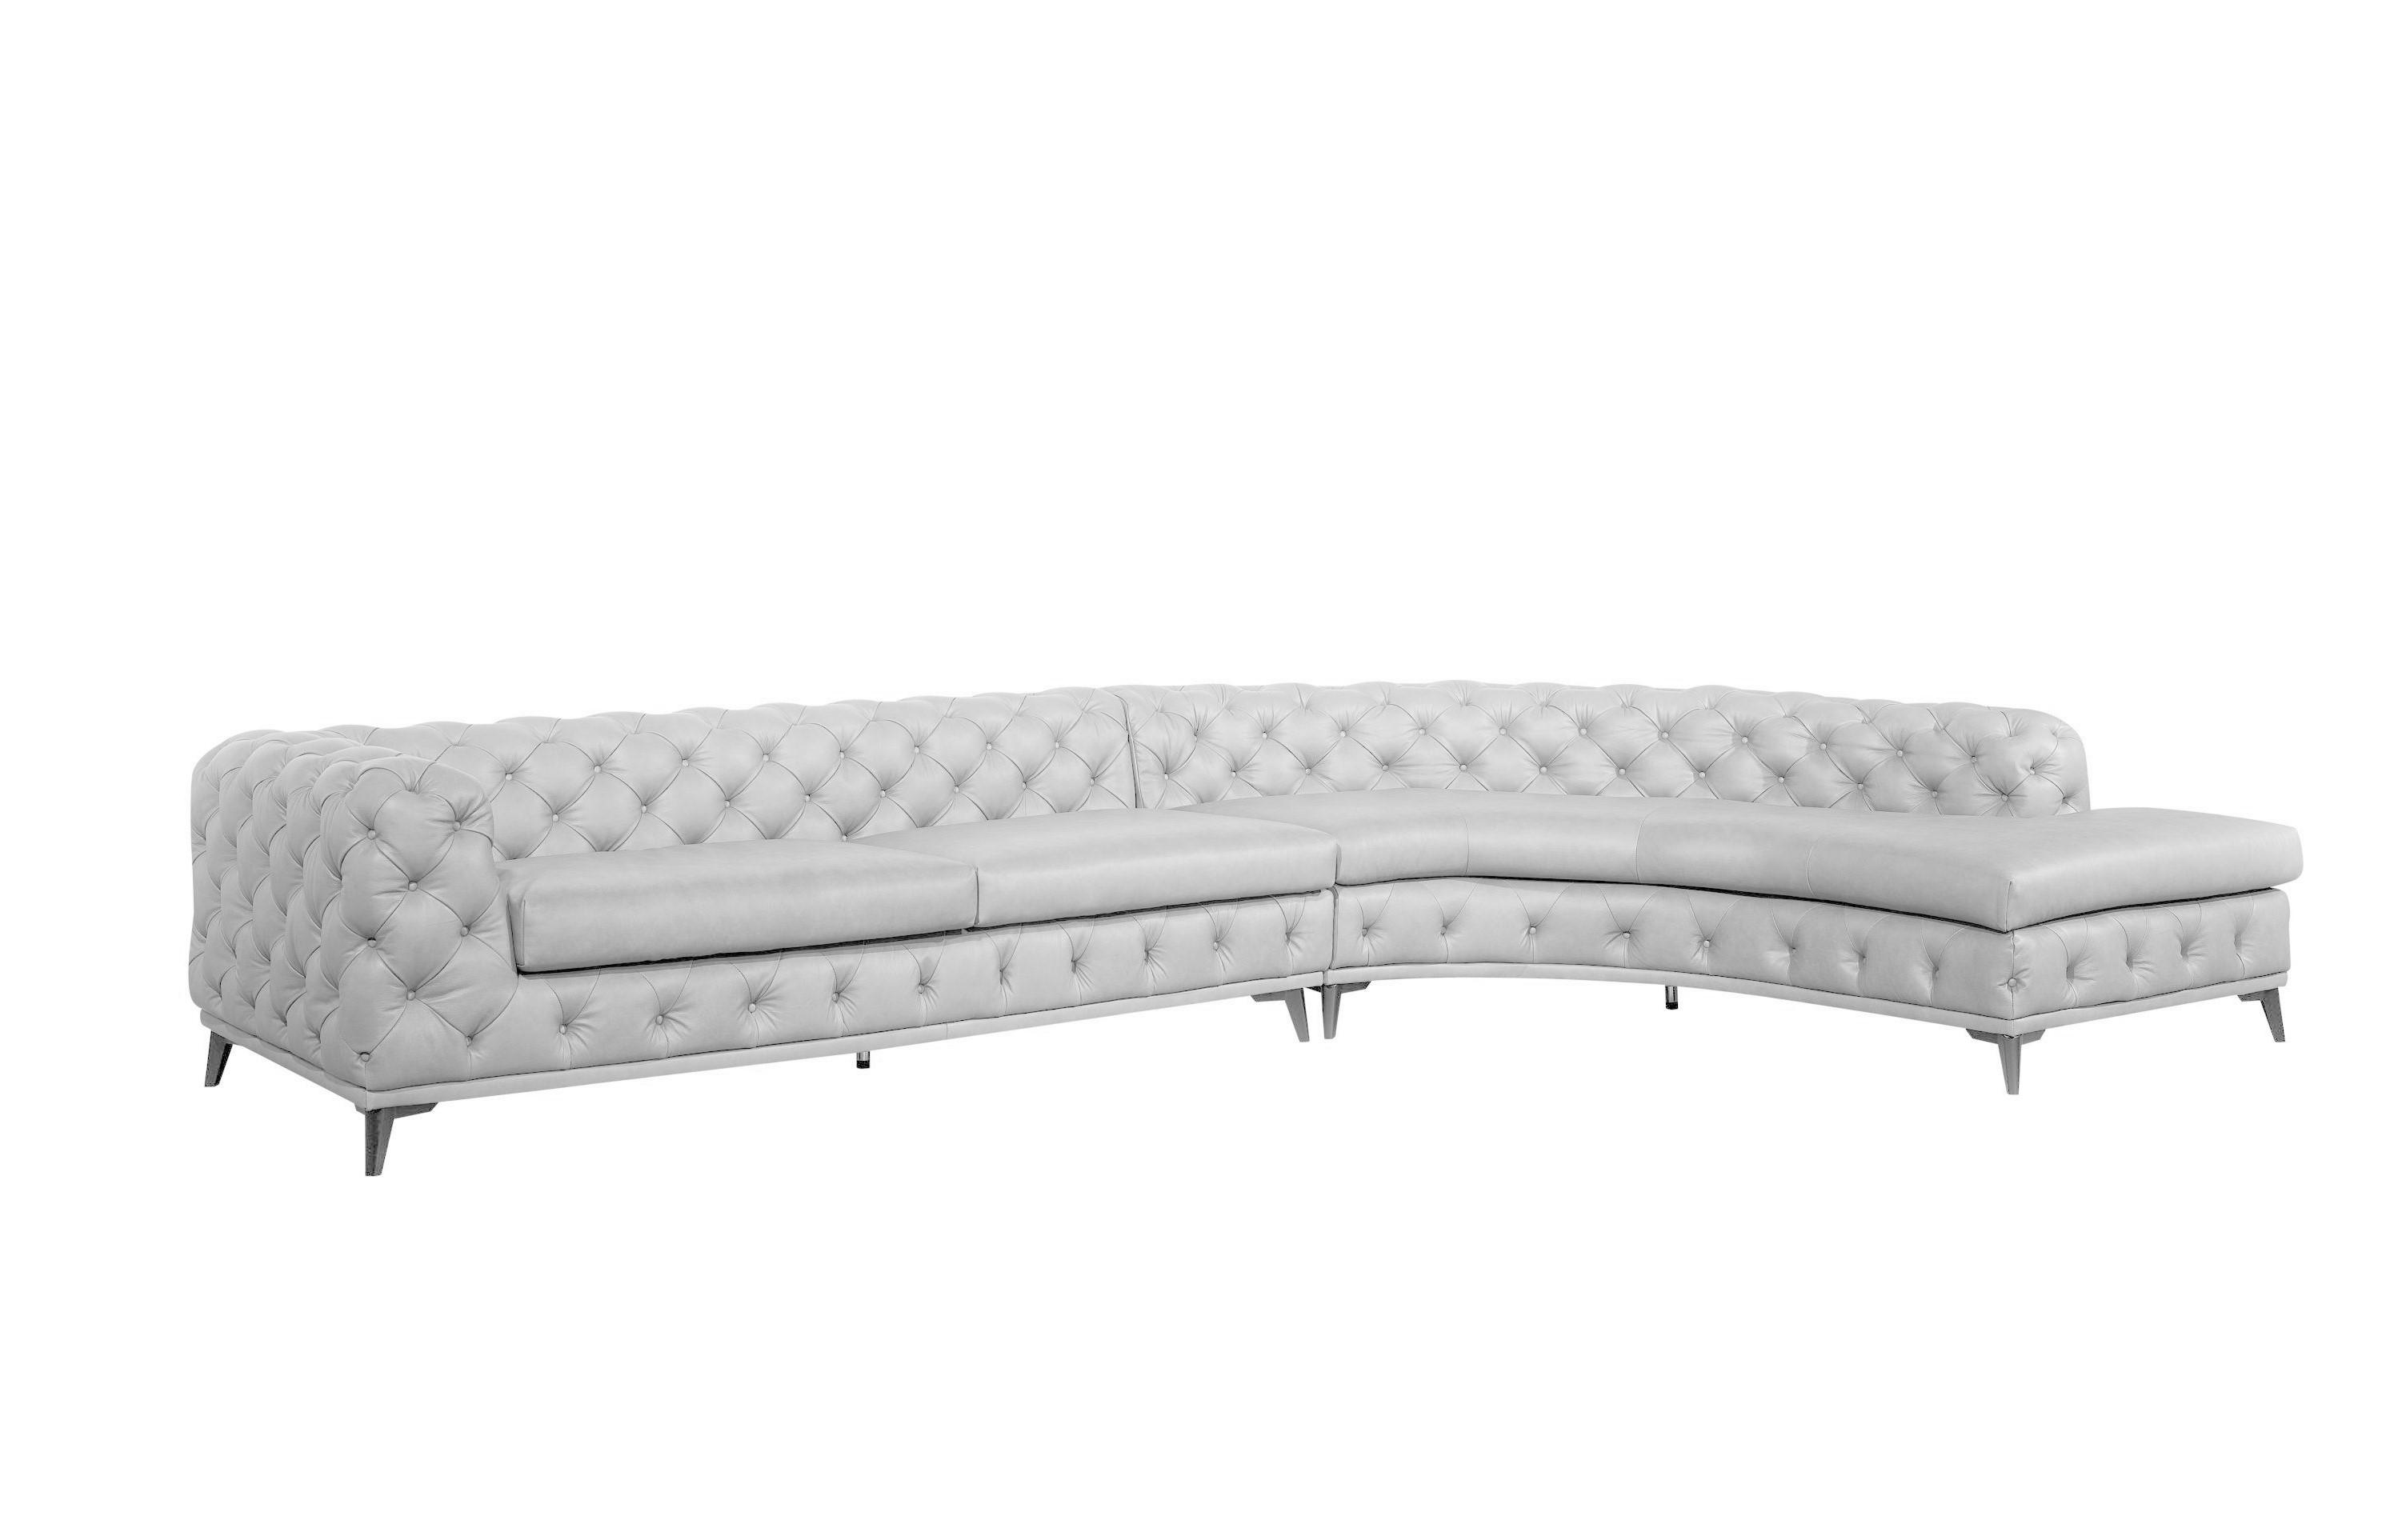 Contemporary, Modern Sectional Sofa Kohl VGEV-2179-WHT-RAF-SECT in White Leather